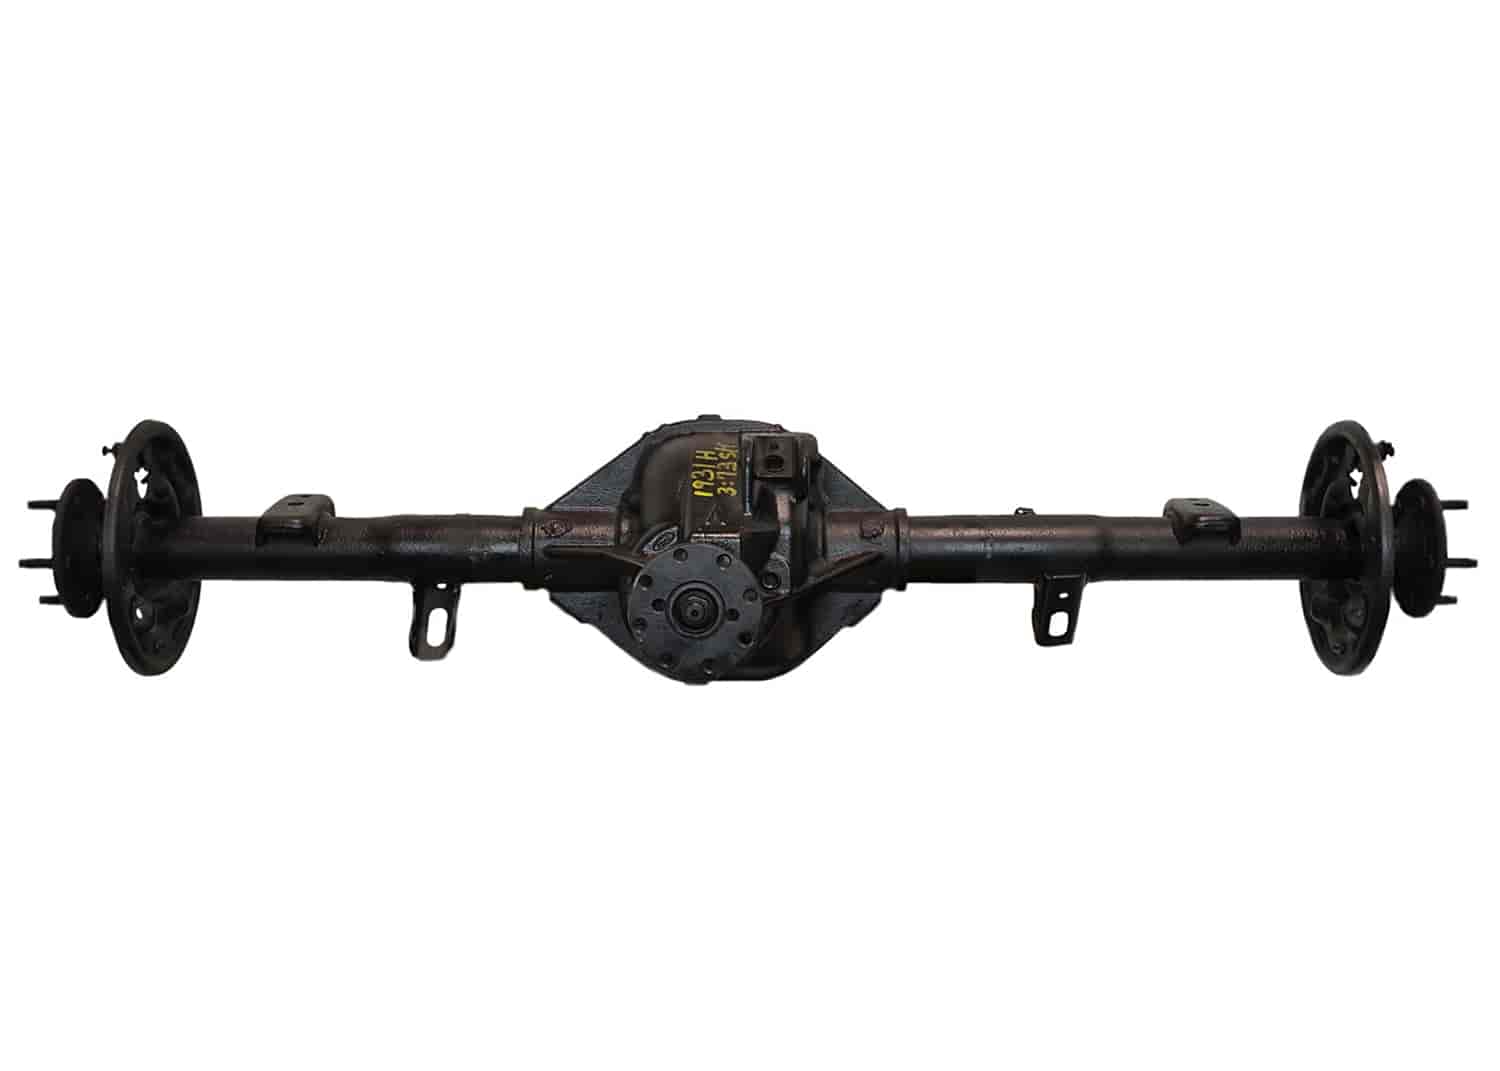 Remanufactured Rear Axle Assembly for 1999-2009 Ford Ranger